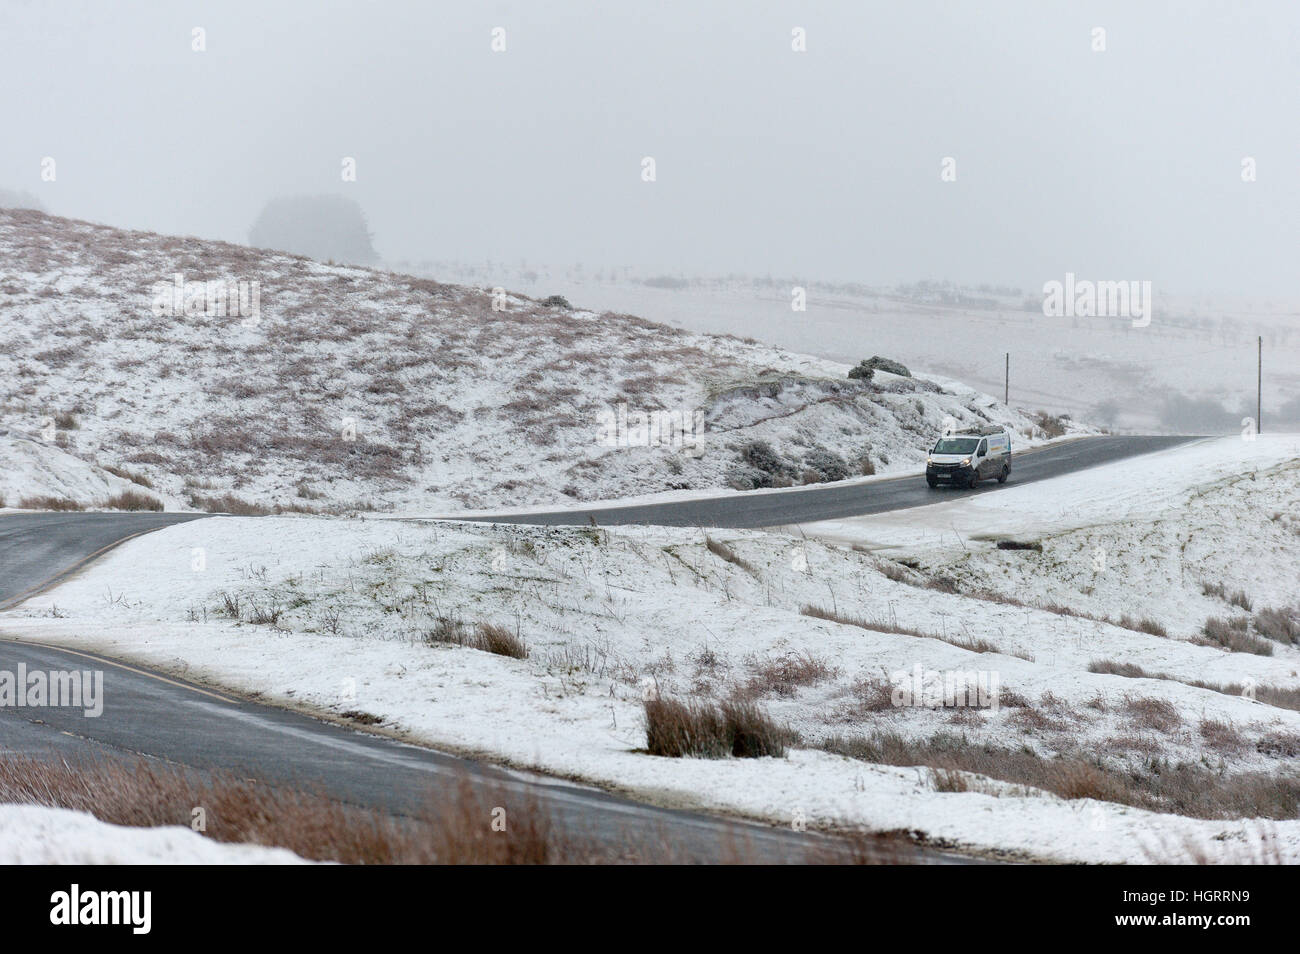 Builth Wells, Powys, Wales, UK. 12th January 2017.  Motorists drive through a wintry landscape on the high moorland of the Mynydd Epynt range near Builth Wells in Powys, Mid Wales, UK. © Graham M. Lawrence/Alamy Live News. Stock Photo